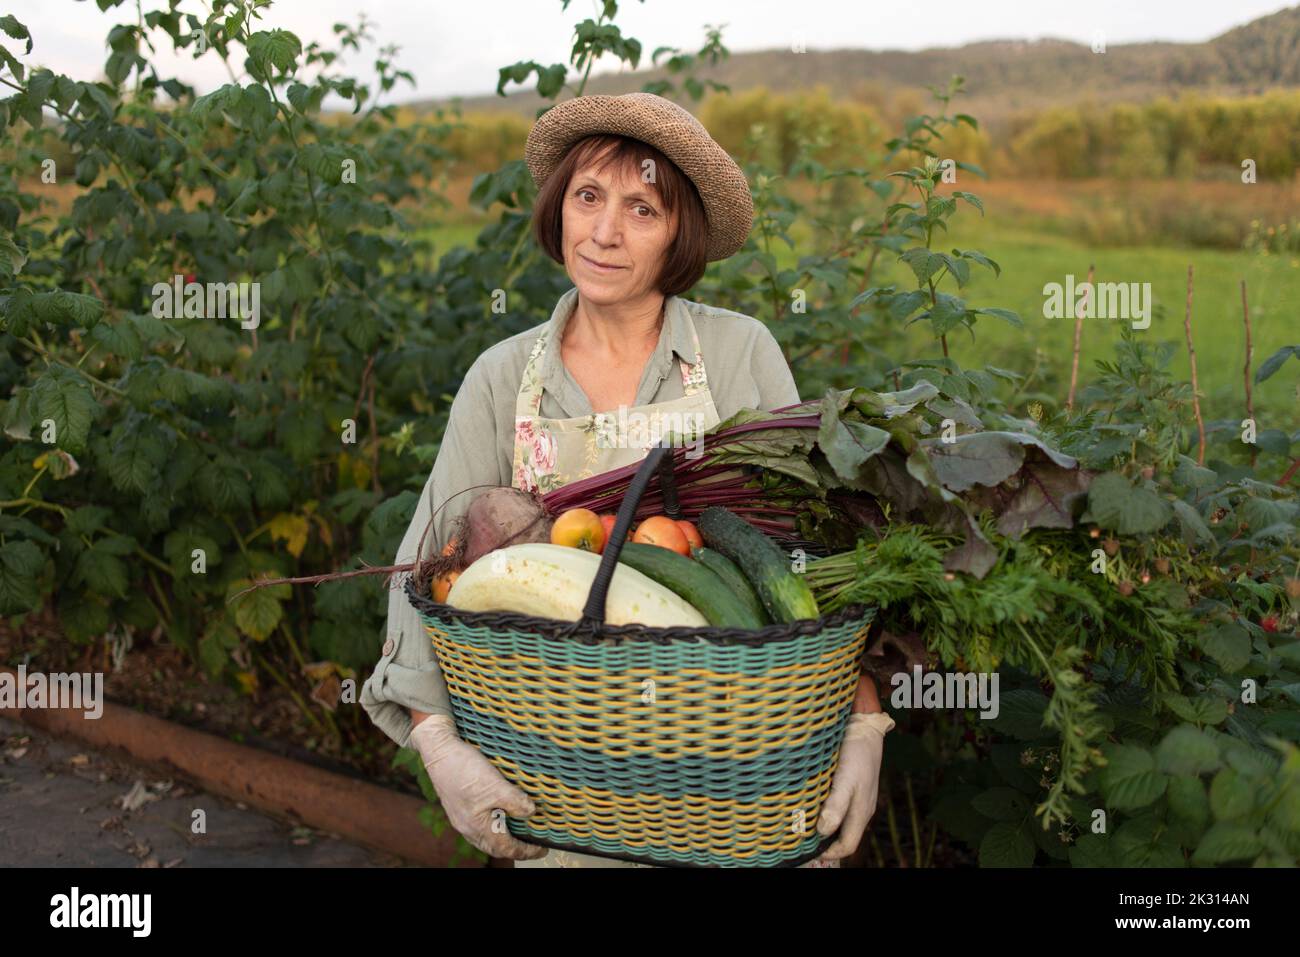 Smiling senior woman with basket of freshly picked vegetables standing by plant Stock Photo